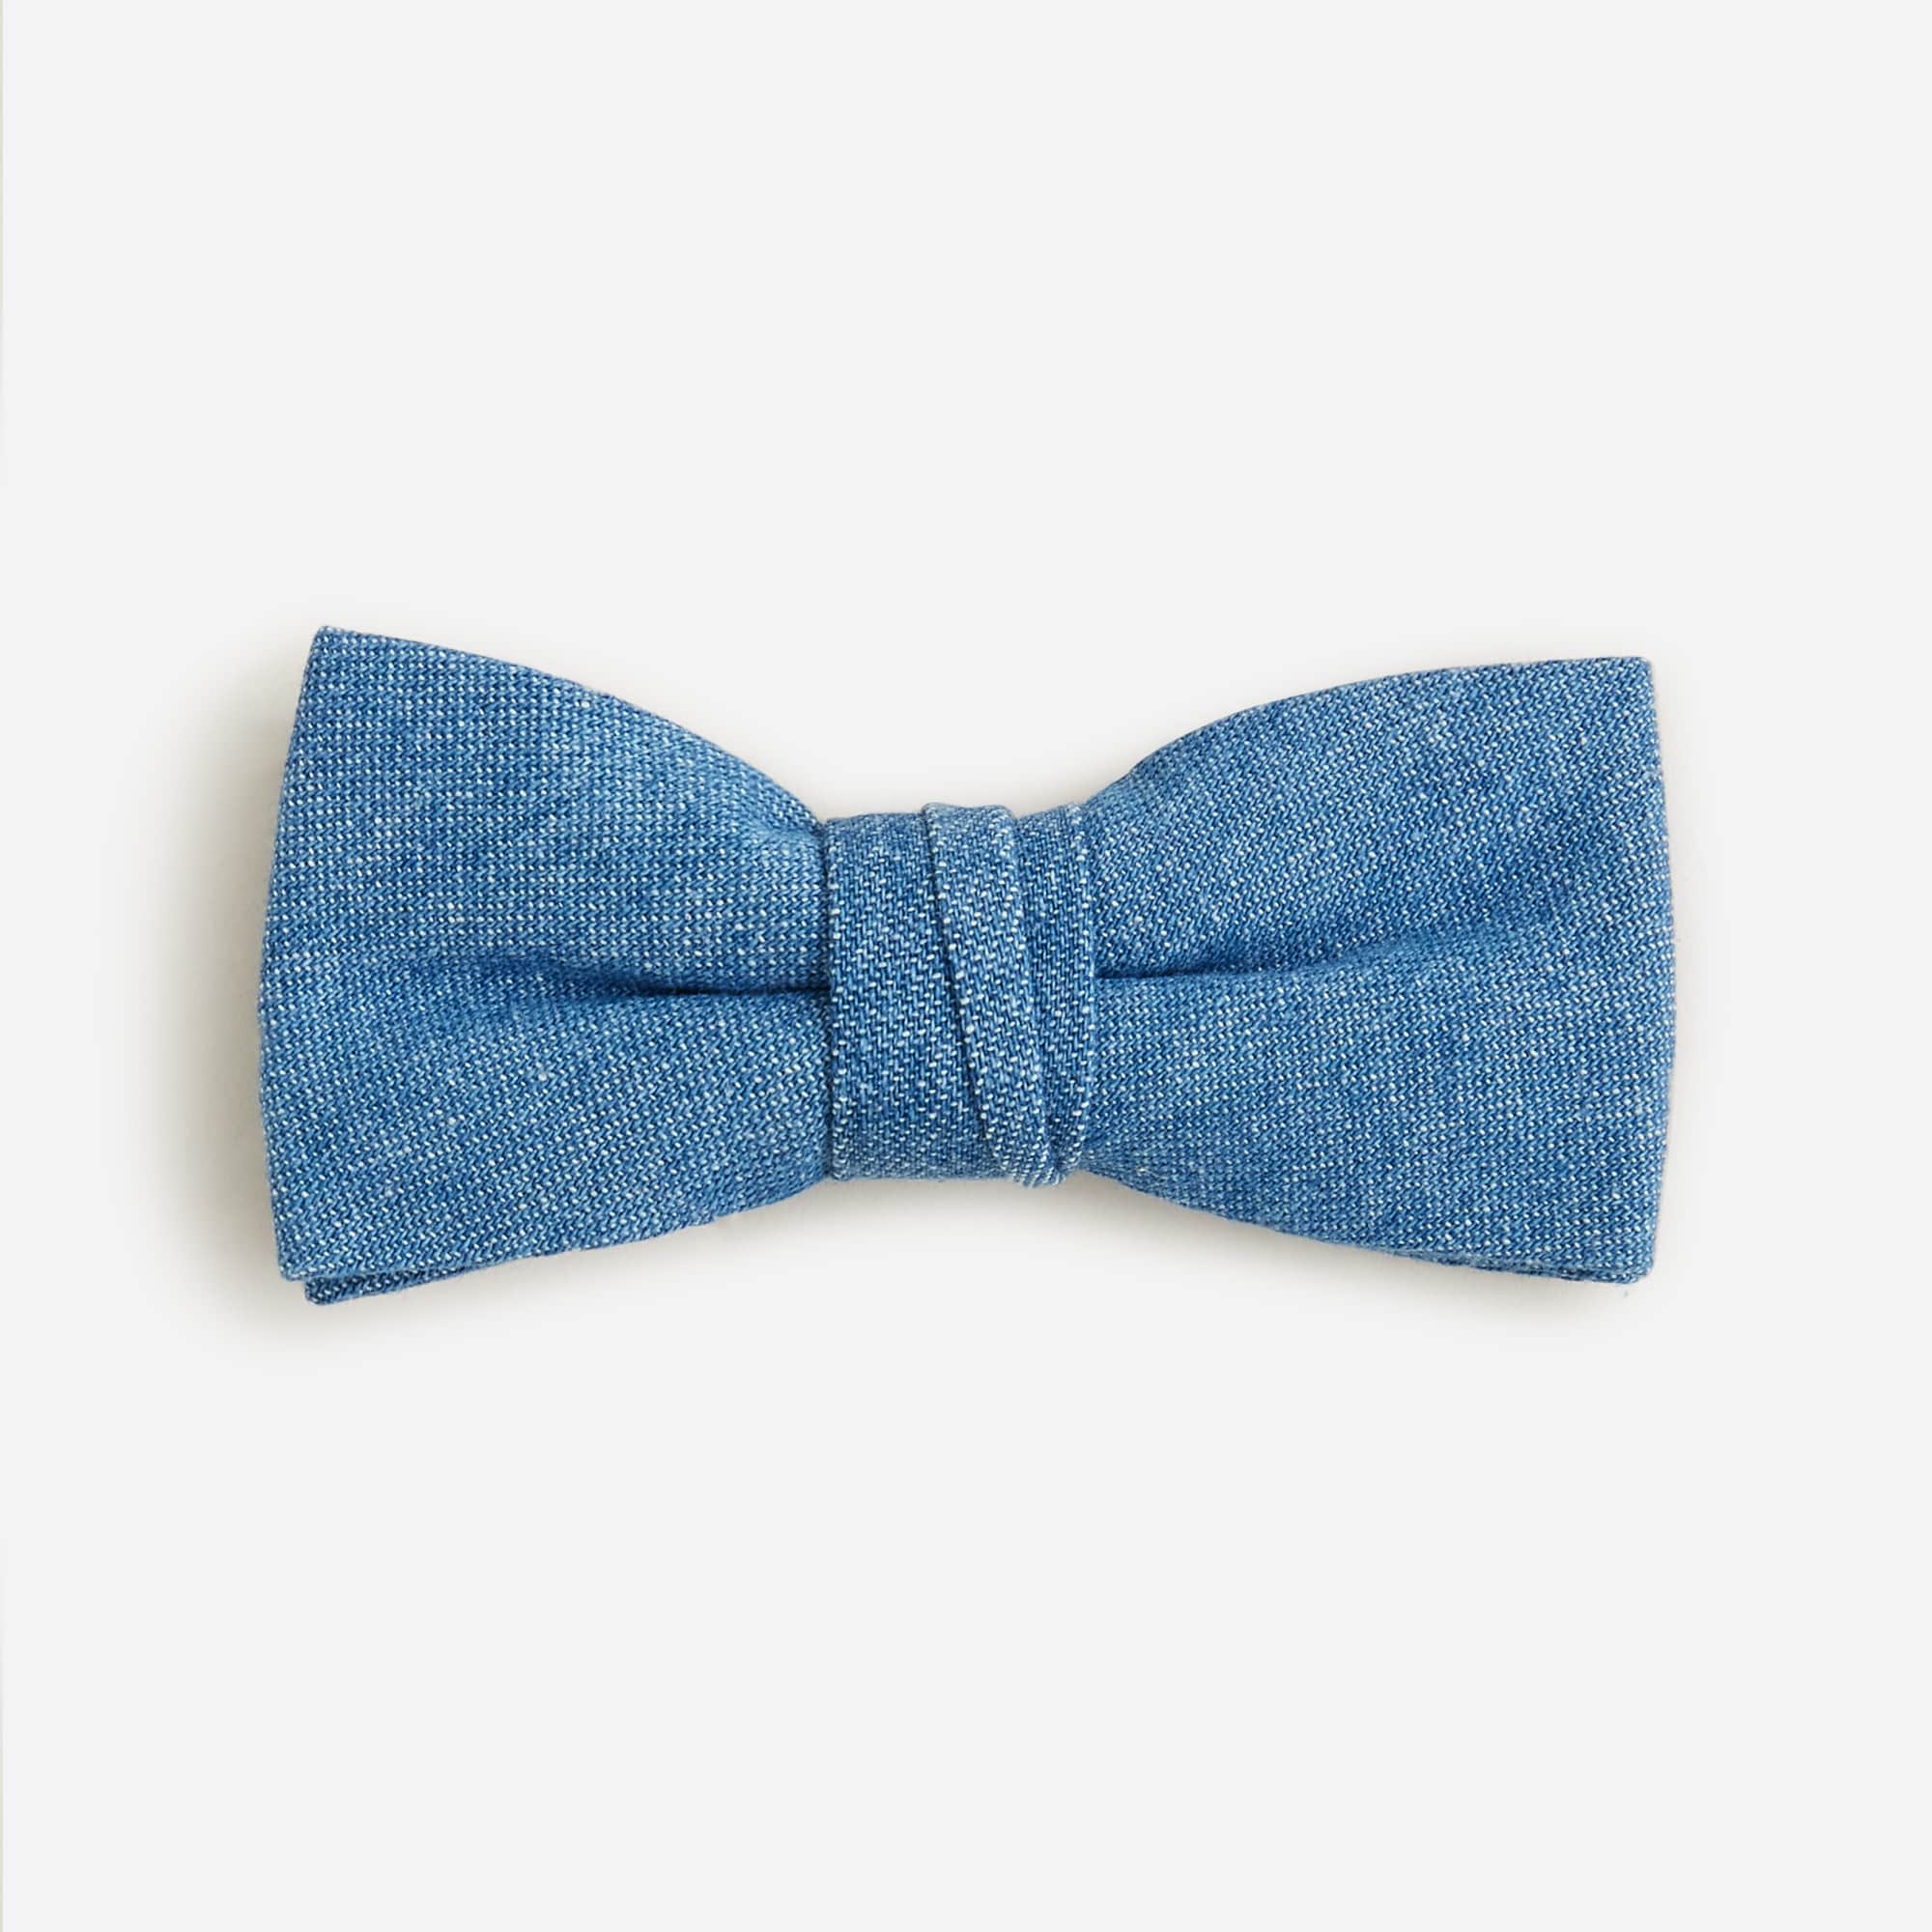  Kids' chambray bow tie